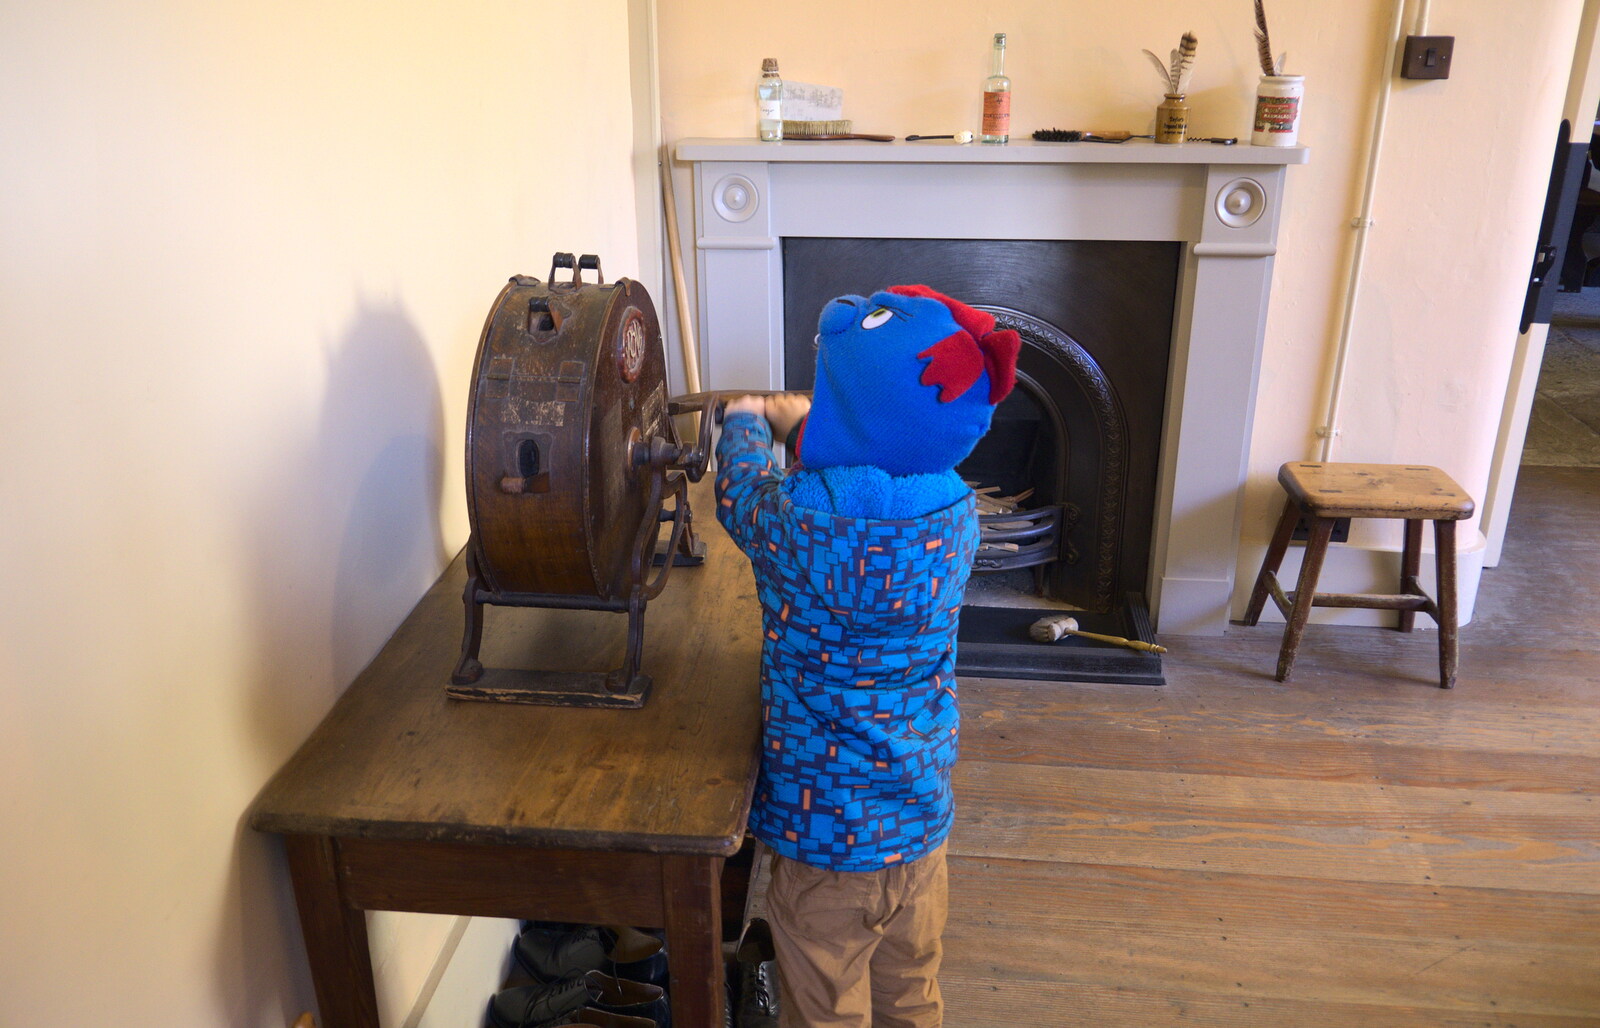 Harry winds something up from Life Below Stairs, Ickworth House, Horringer, Suffolk - 28th January 2018